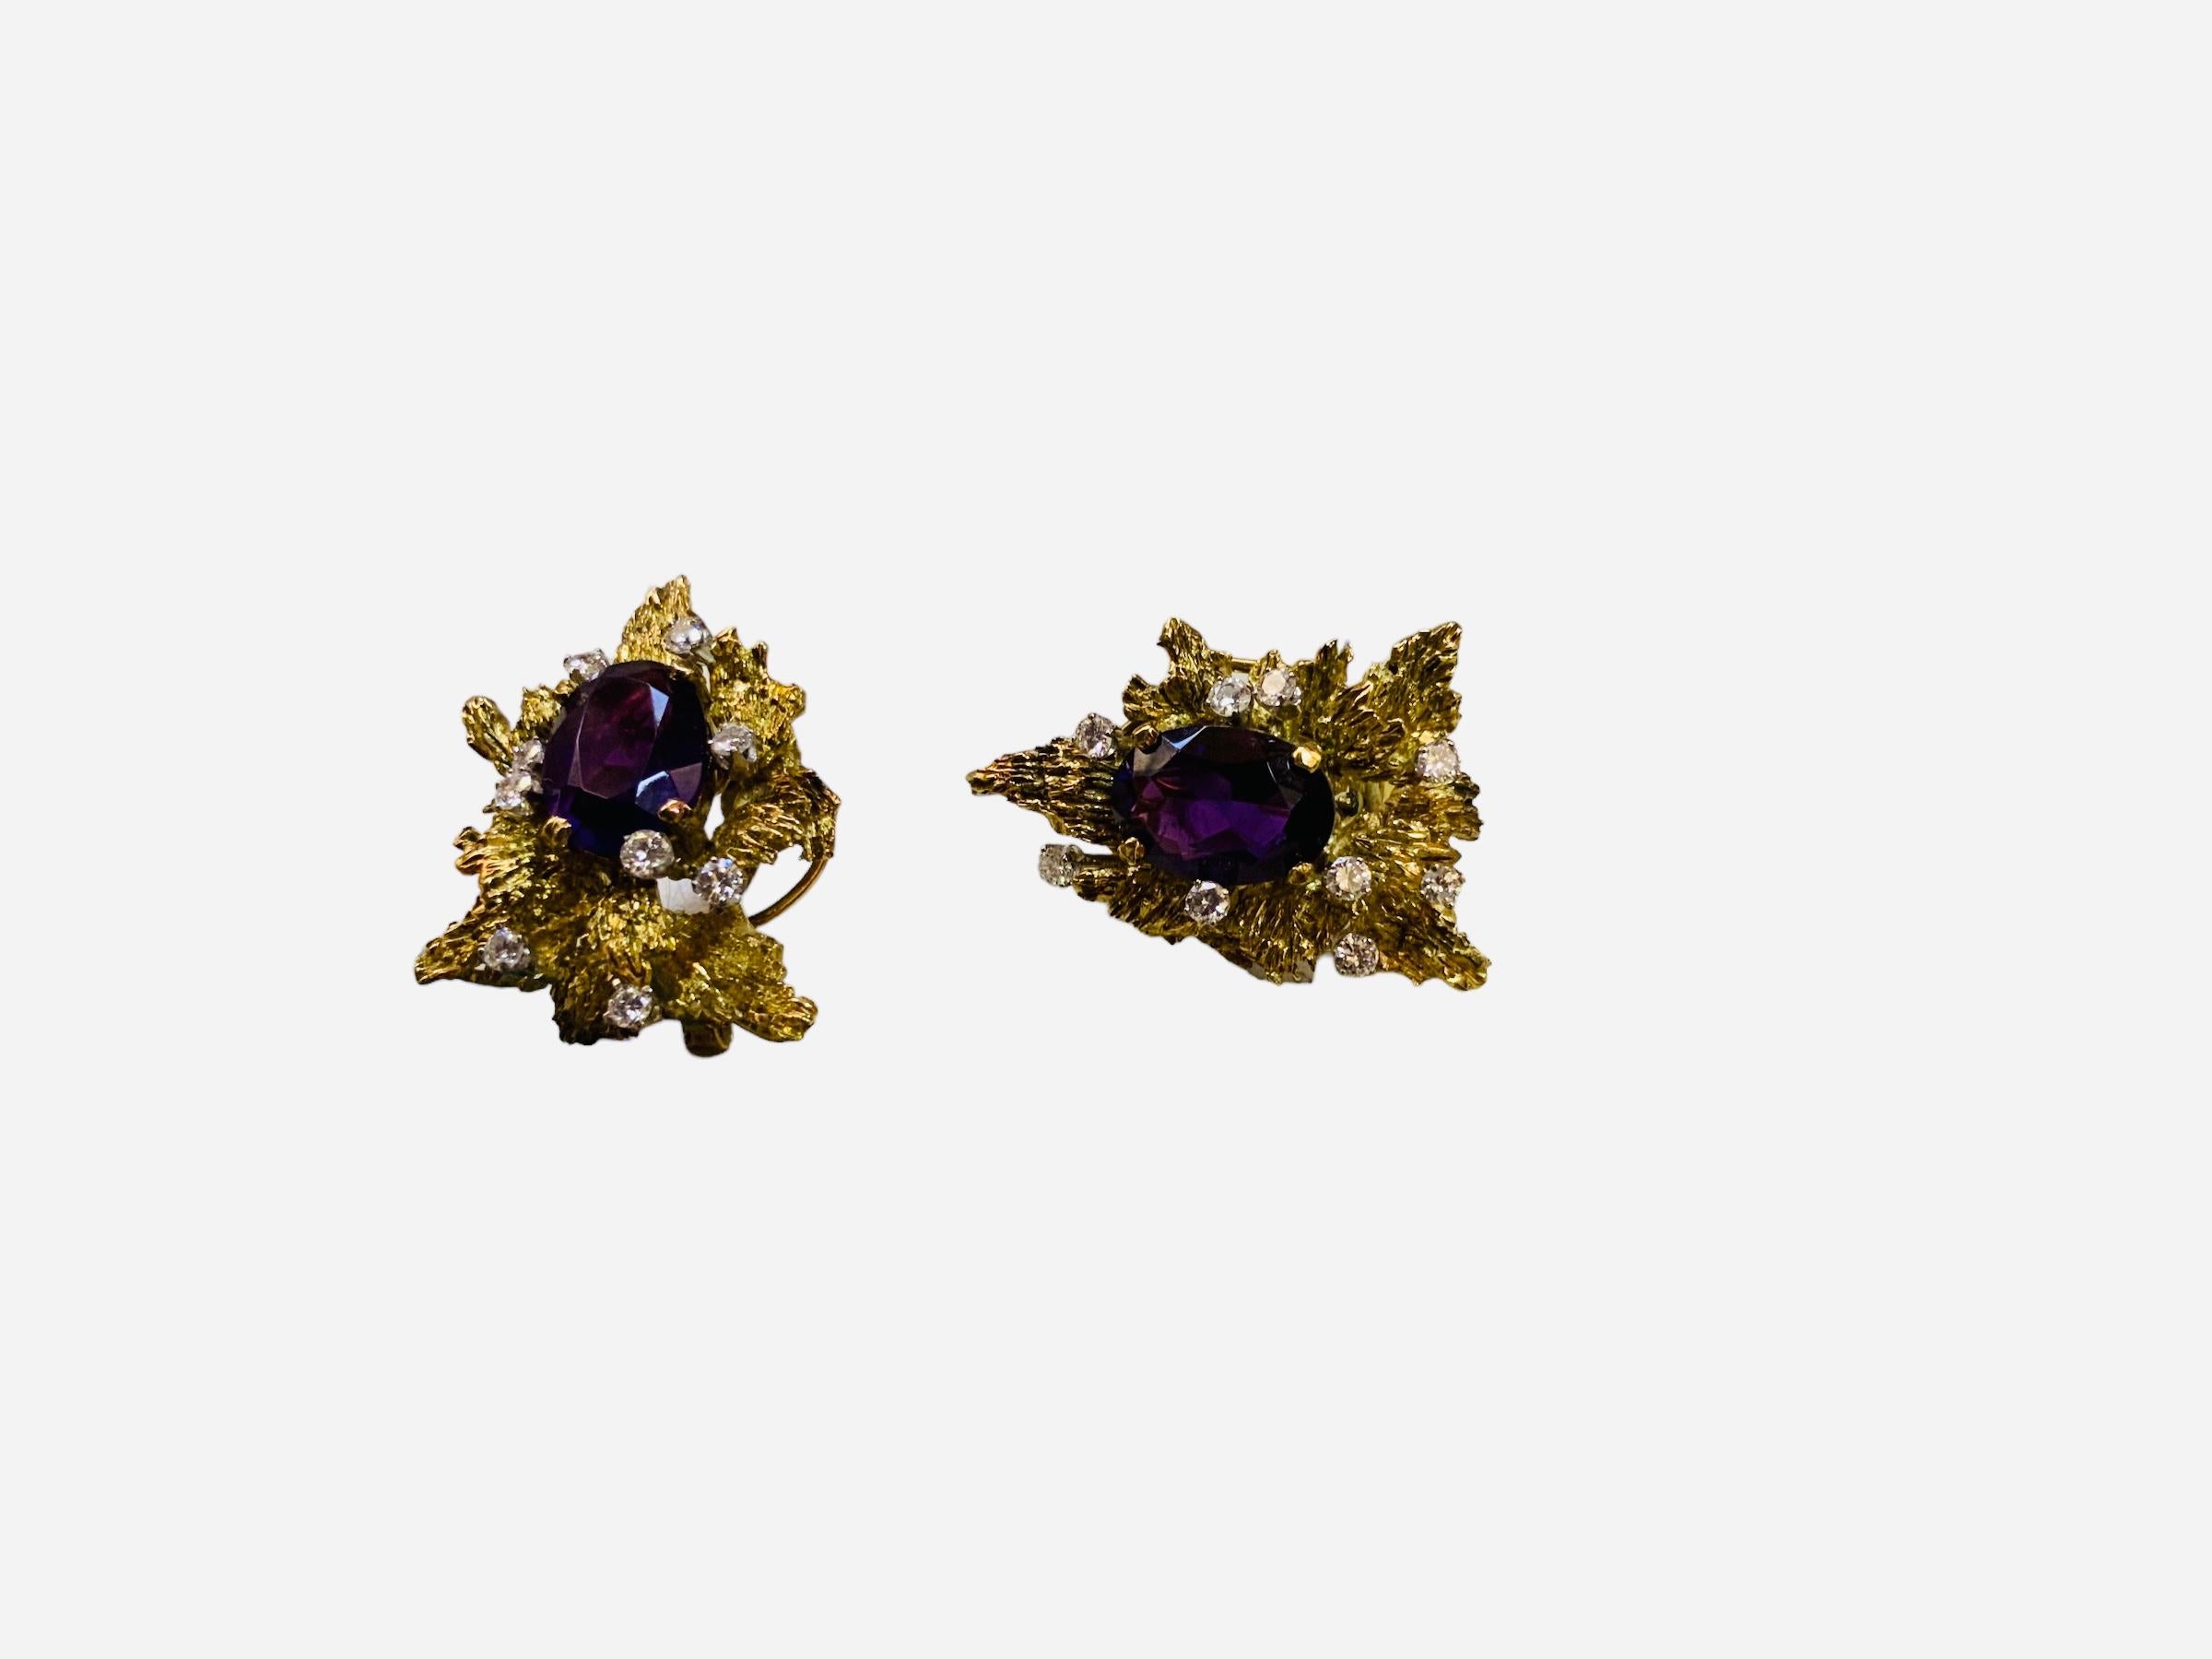 Brutalist Style Pair Of 14K Gold Amethyst And Diamonds Earrings  For Sale 5